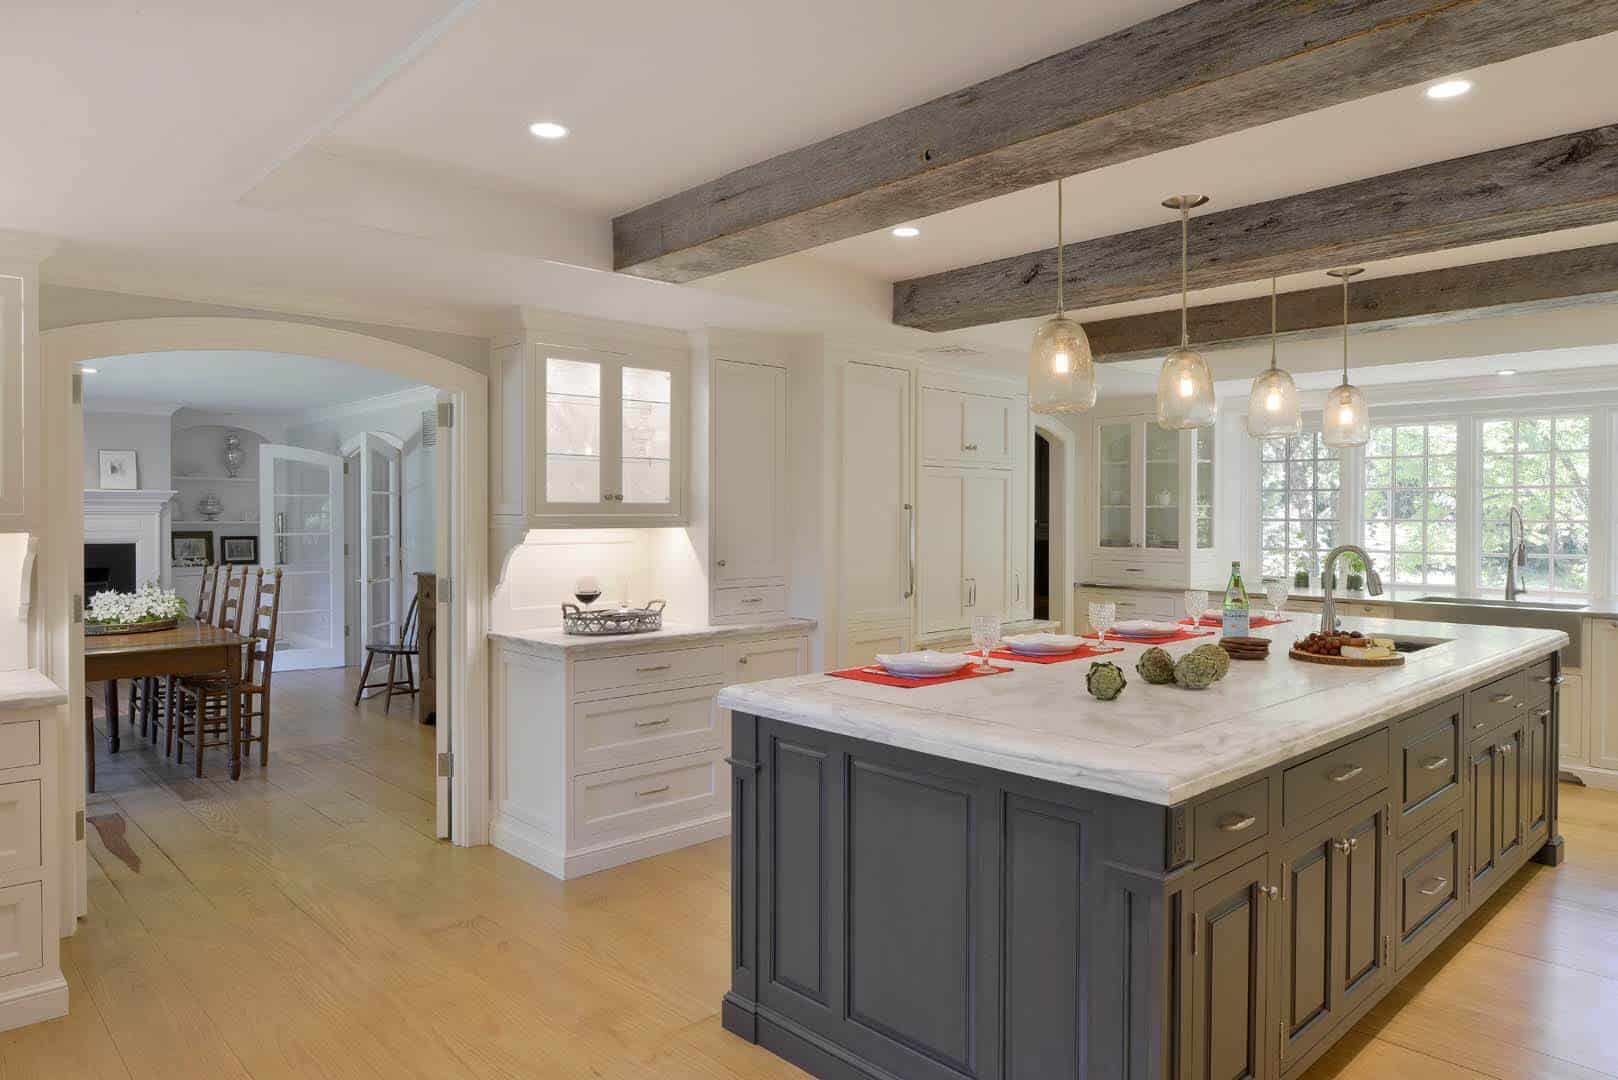 Expansive Waccabuc kitchen features exposed beams, white Bilotta cabinetry and large grey island with marble top.